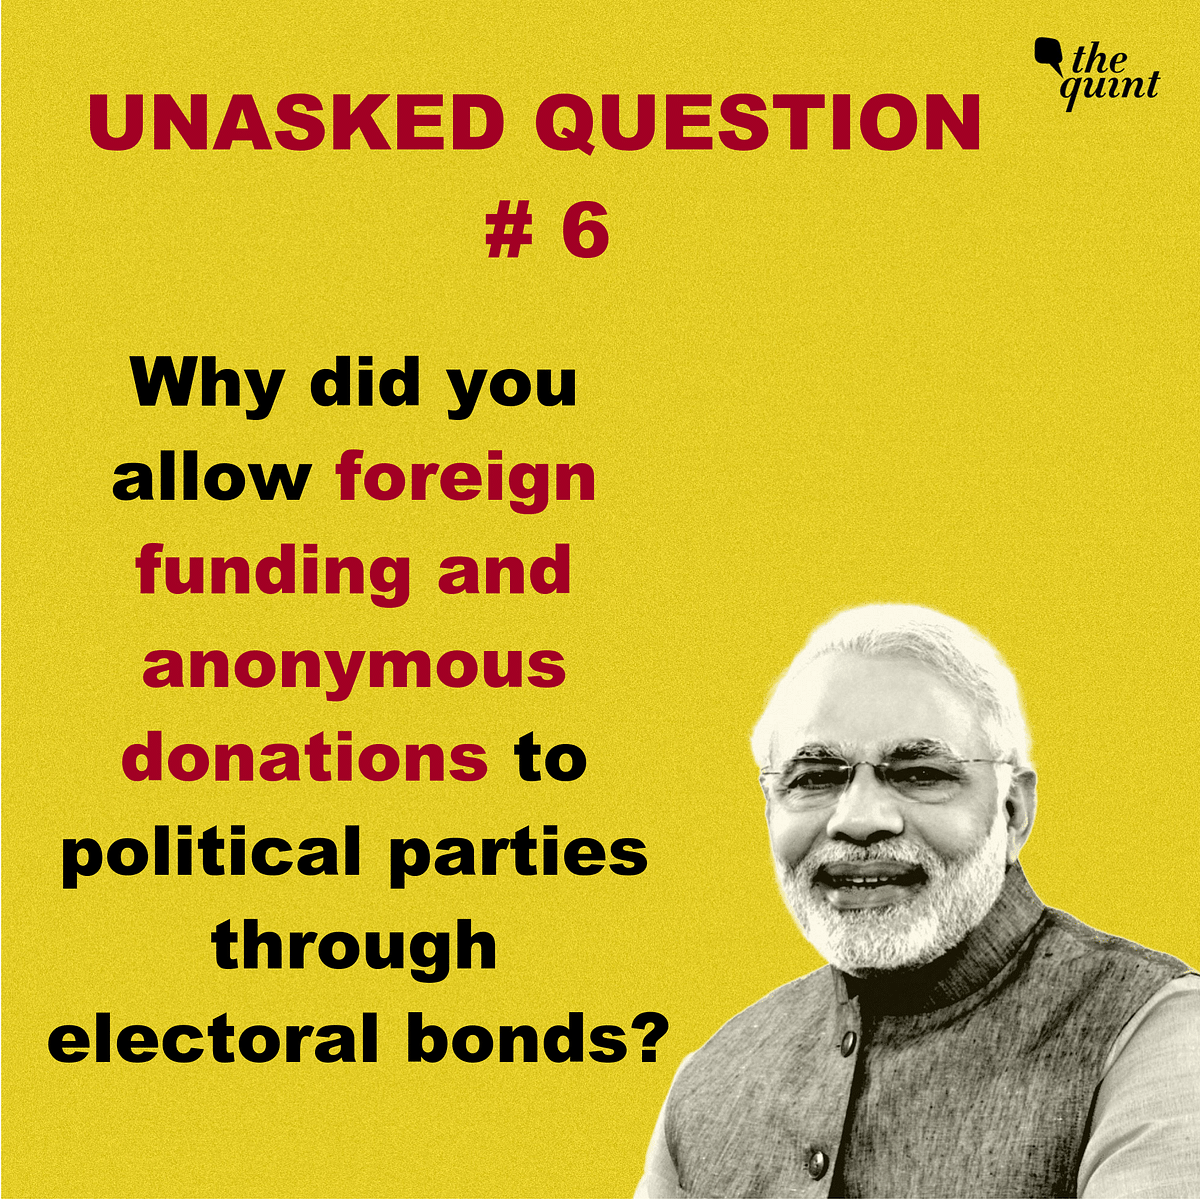 Modi wasn’t asked any questions on demonetisation,  lynch mobs, abusive trolls, farmer distress or electoral bonds